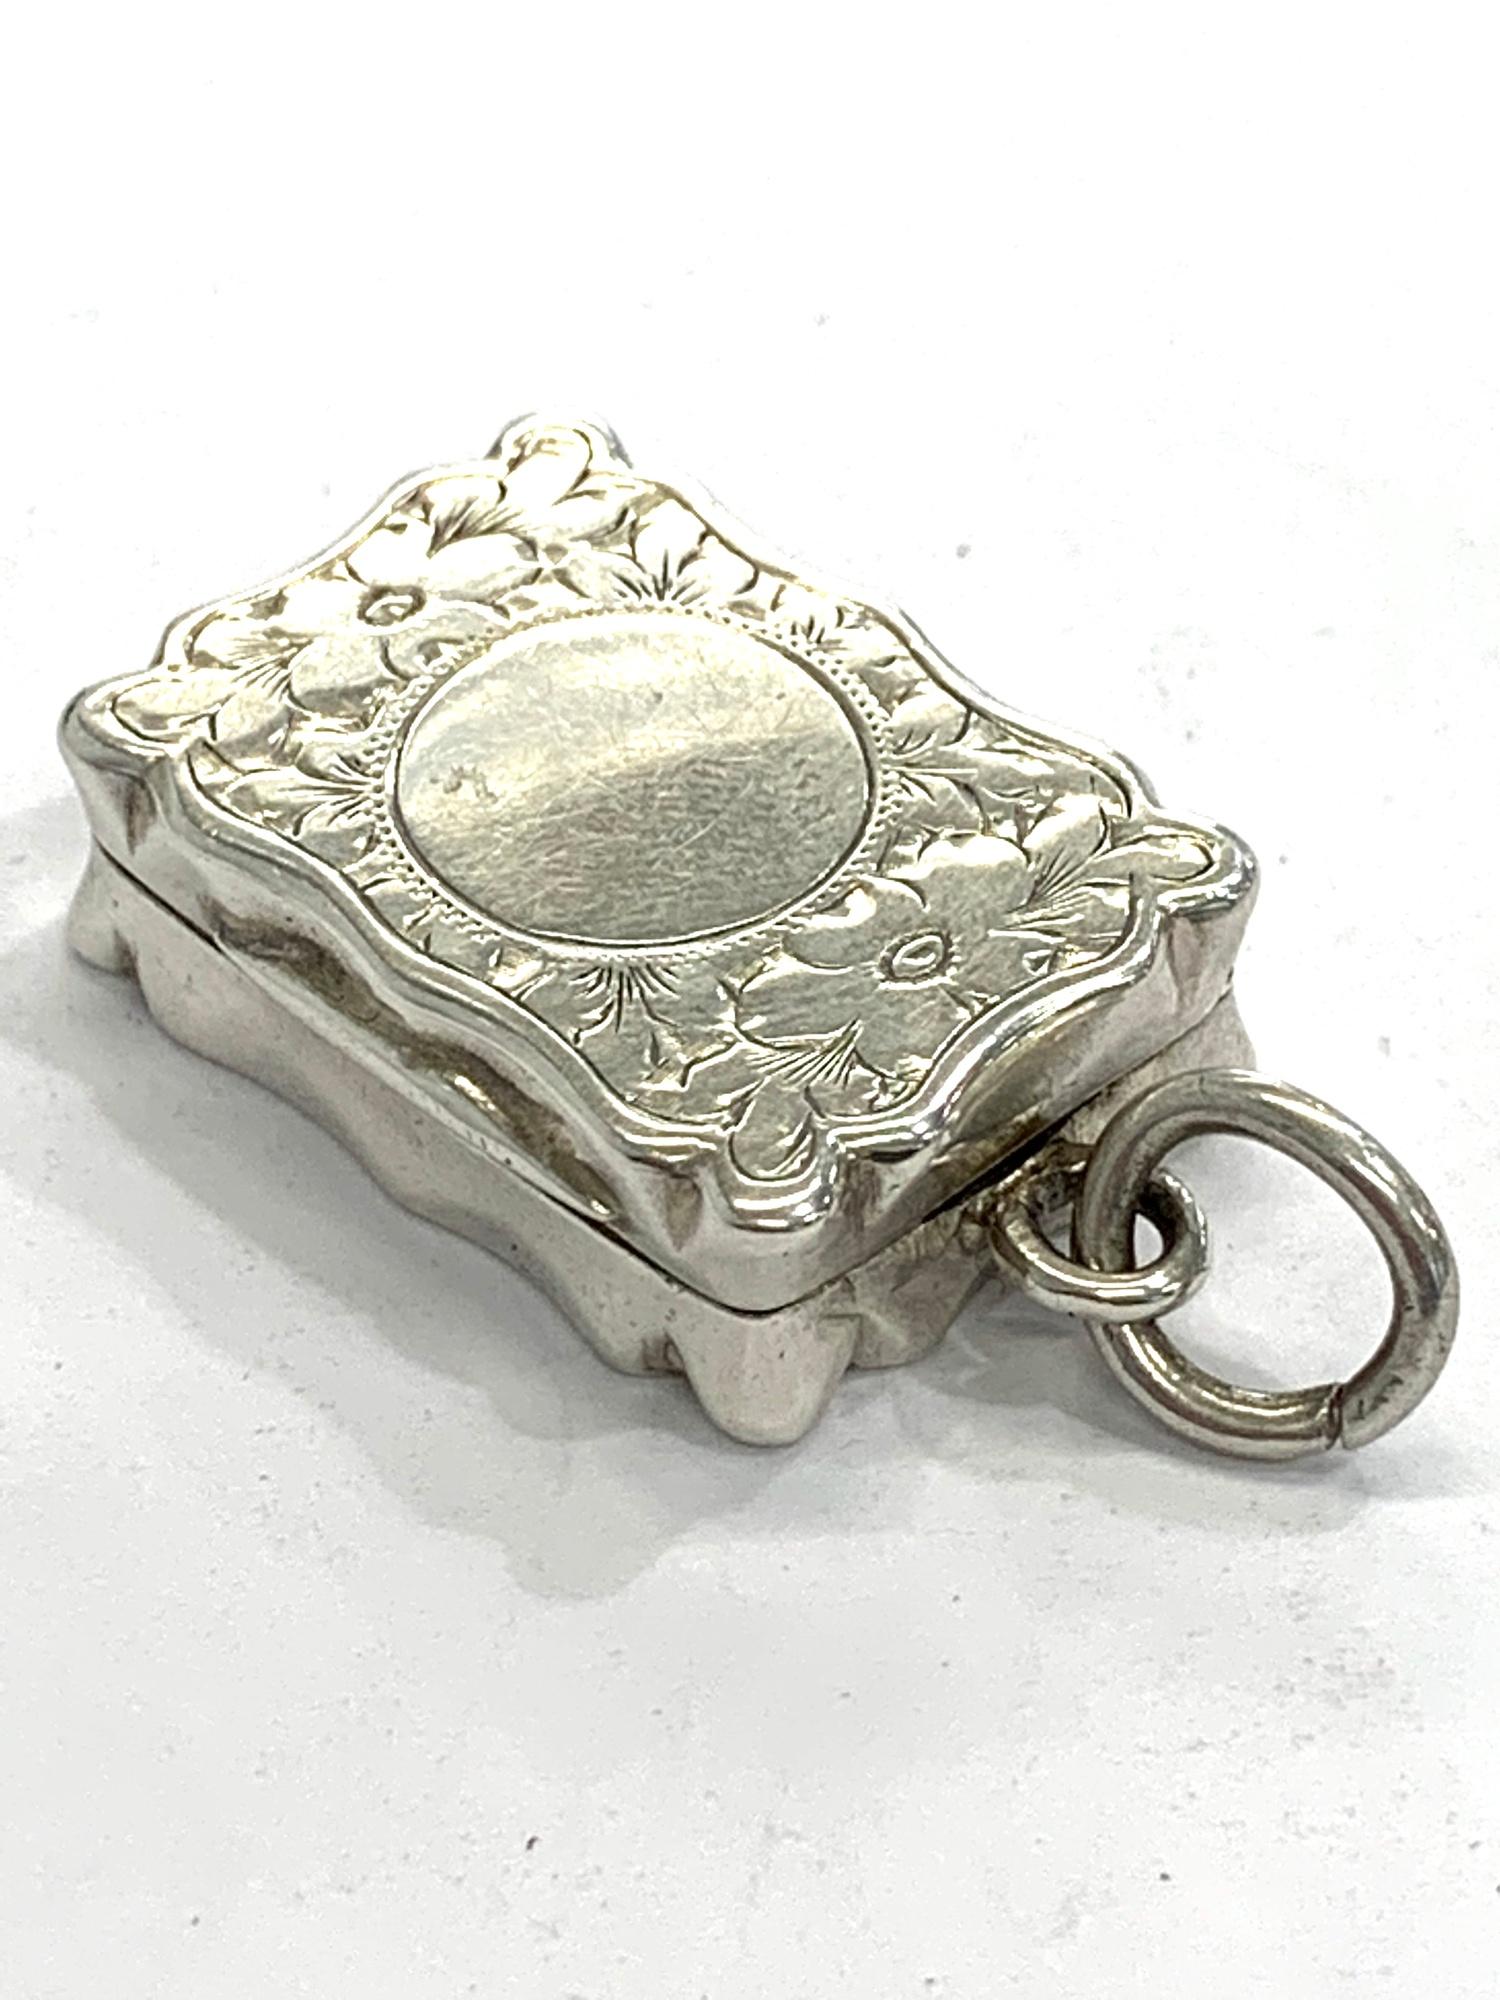 Antique silver vinaigrette makers C.C Chester silver hallmarks complete with grill good condition - Image 3 of 3